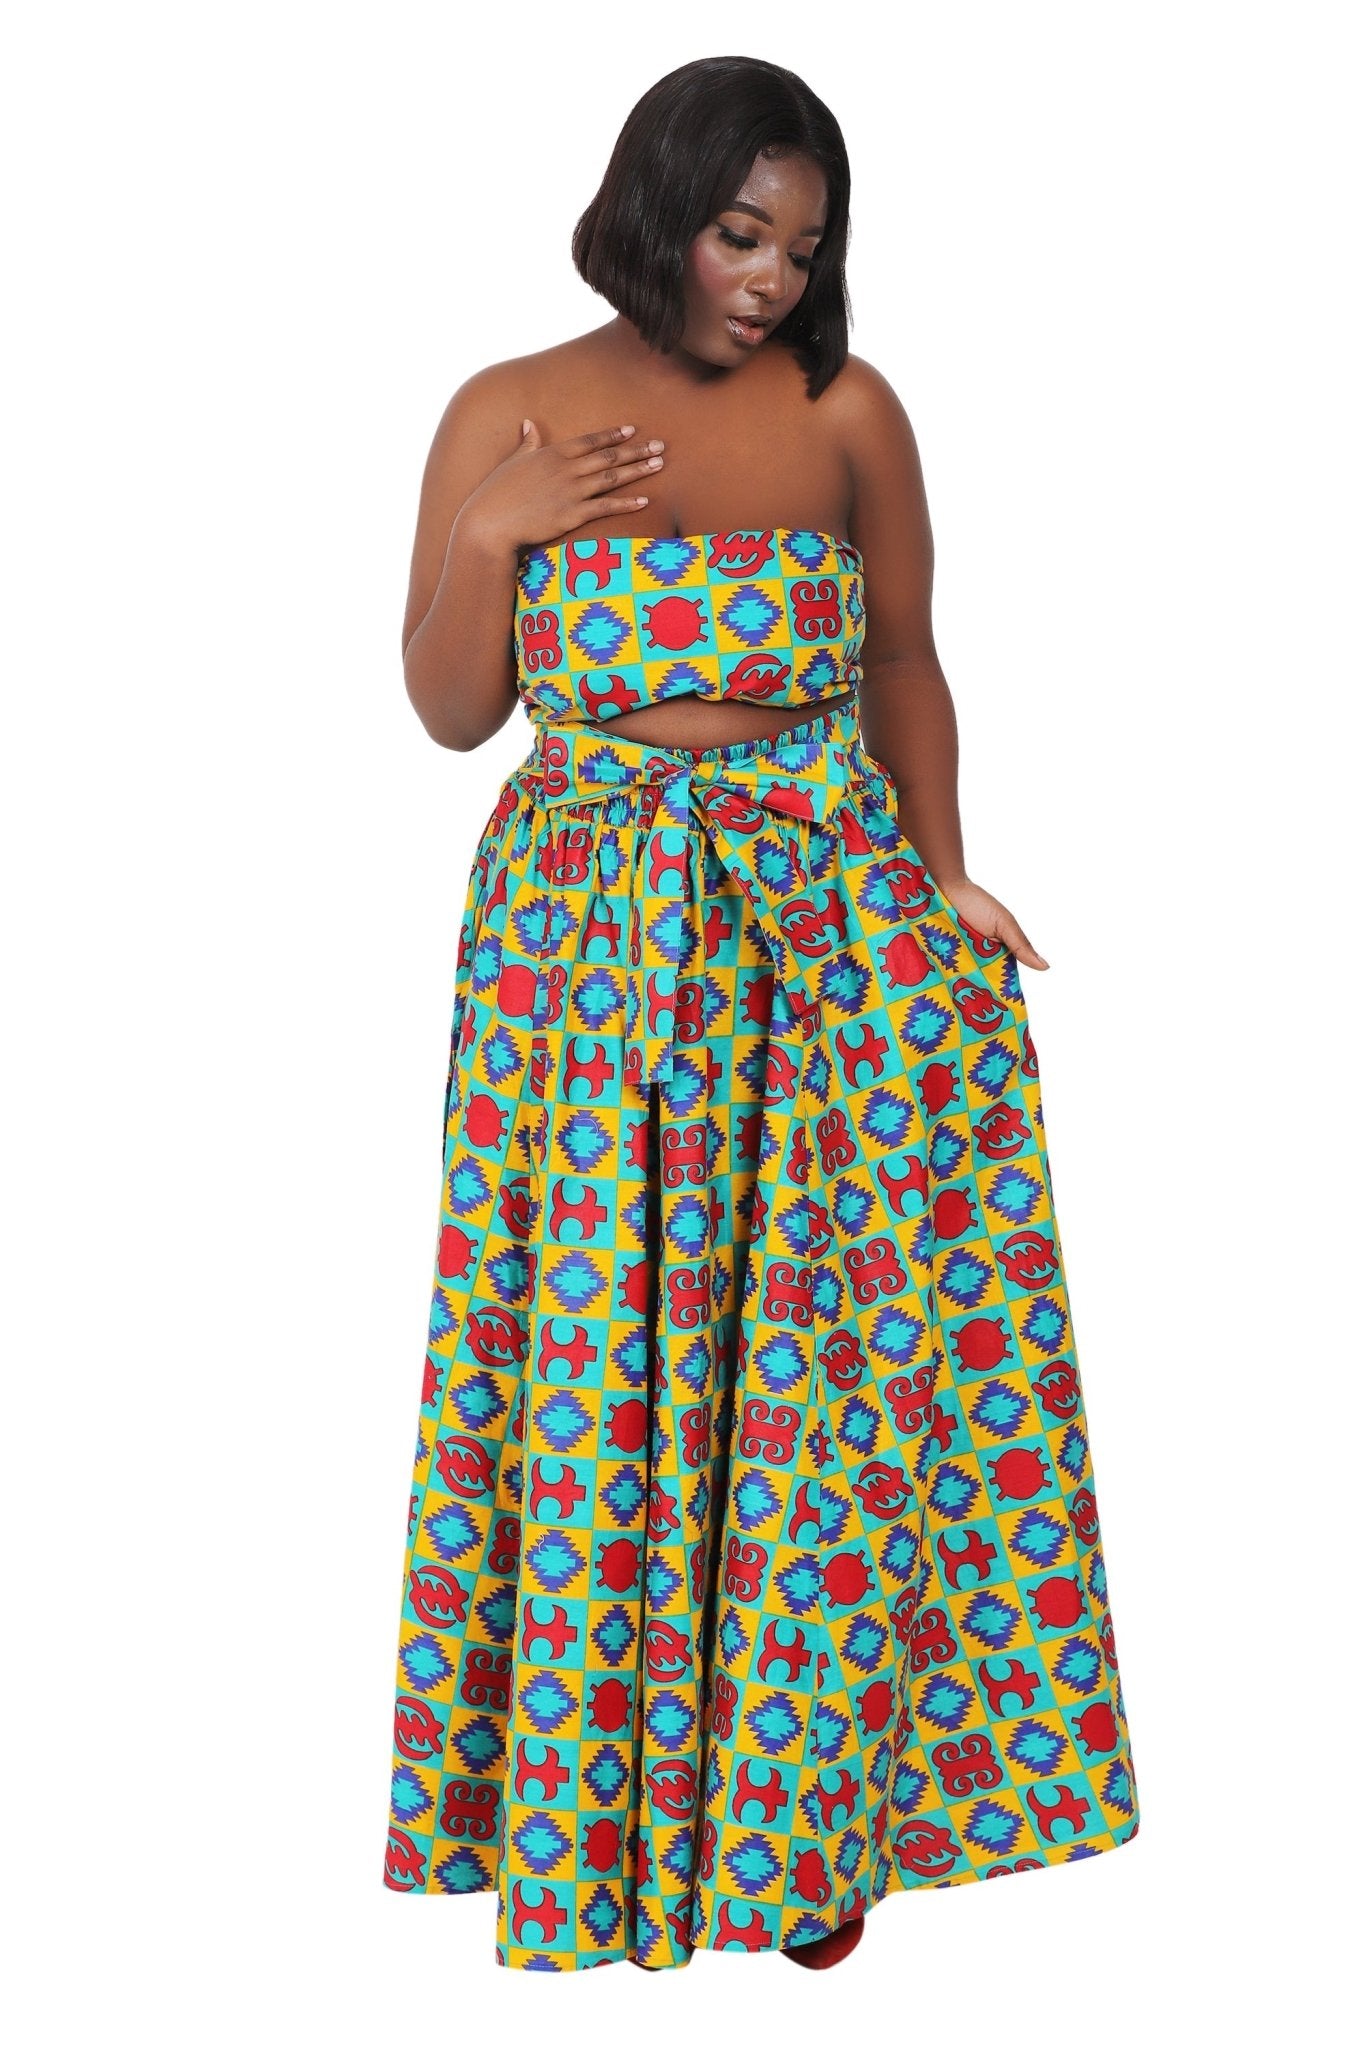 African Print Wax Print Skirt One Size Fits Most Headwrap Included Elastic Waist Pockets 16317-203 - Advance Apparels Inc